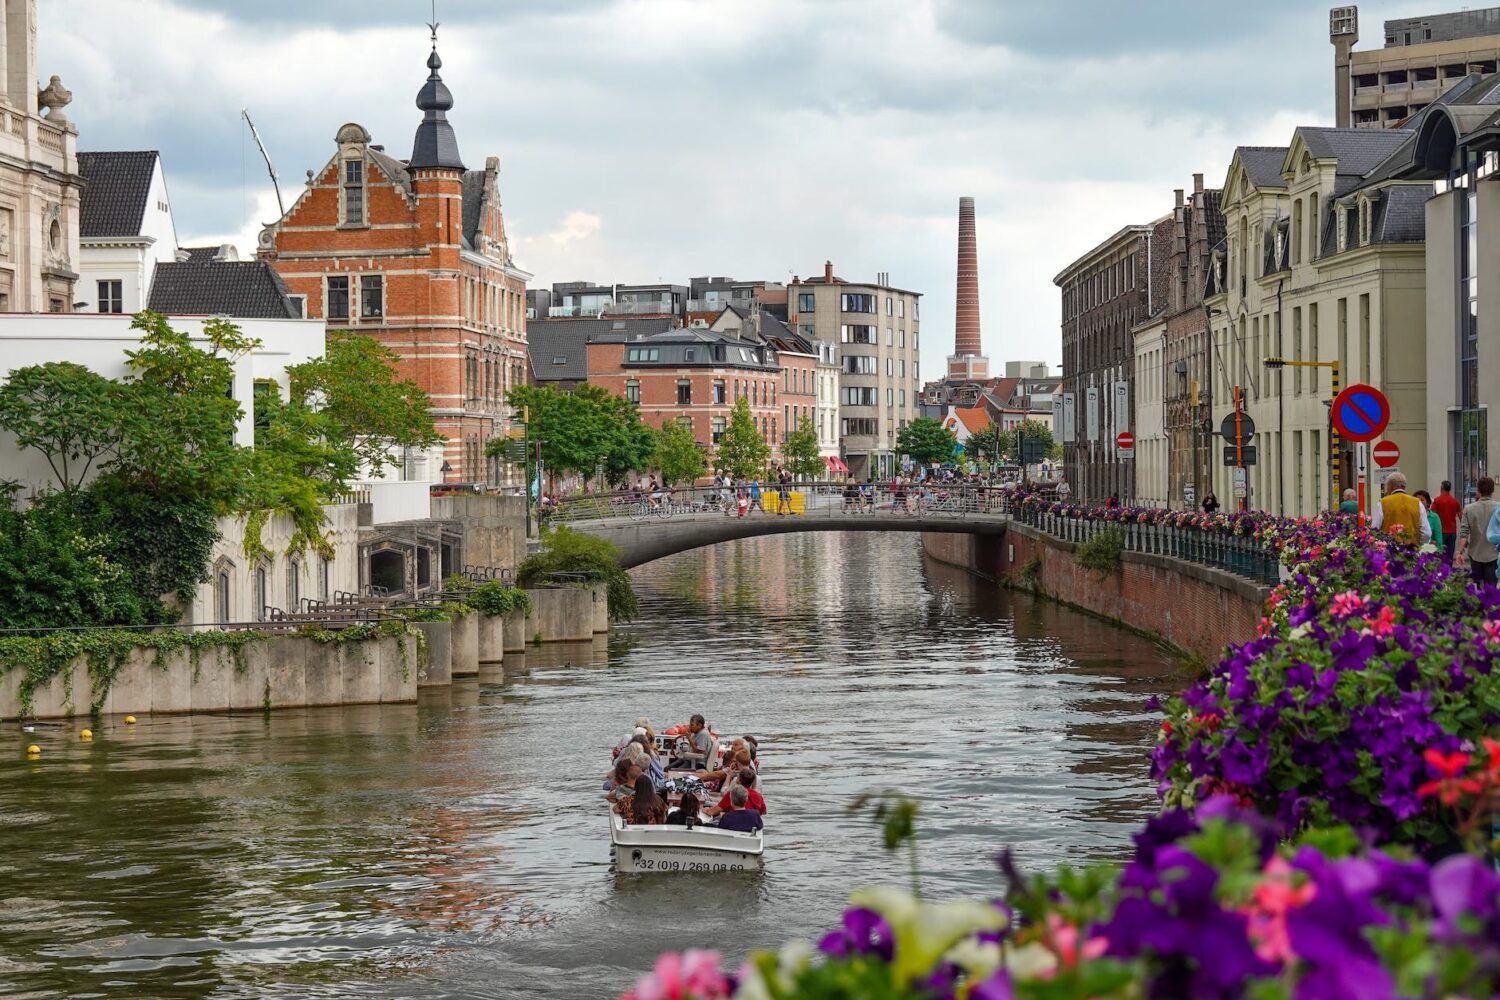 Ghent: A Hidden Gem of Acceptance – LGBTQ+ Life in Belgium’s Charming City